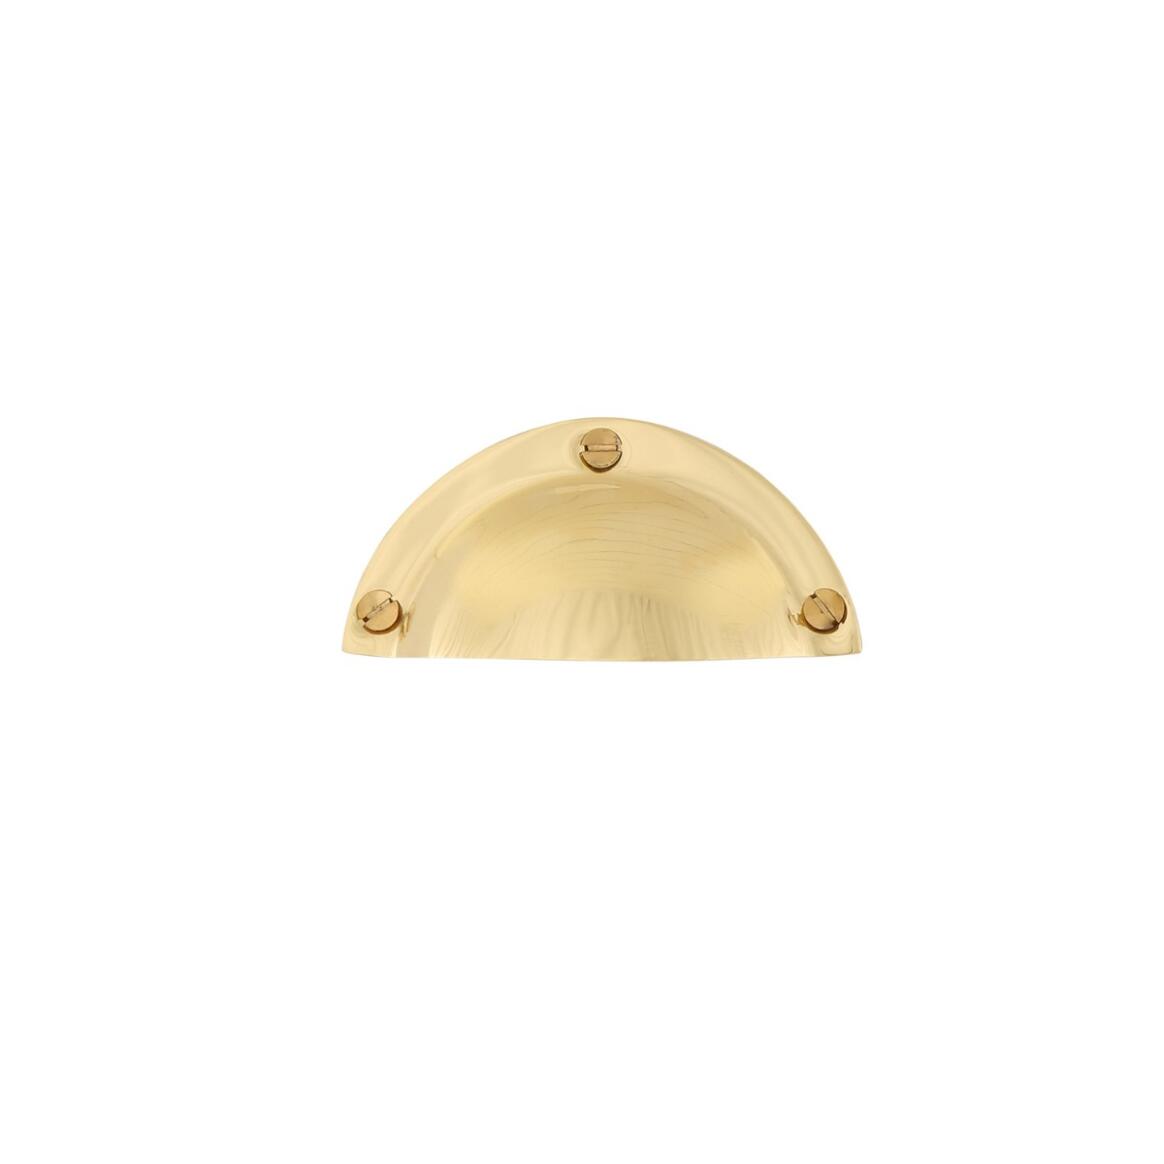 Malin Brass Drawer Shell Pull Handle 3.7" main product image